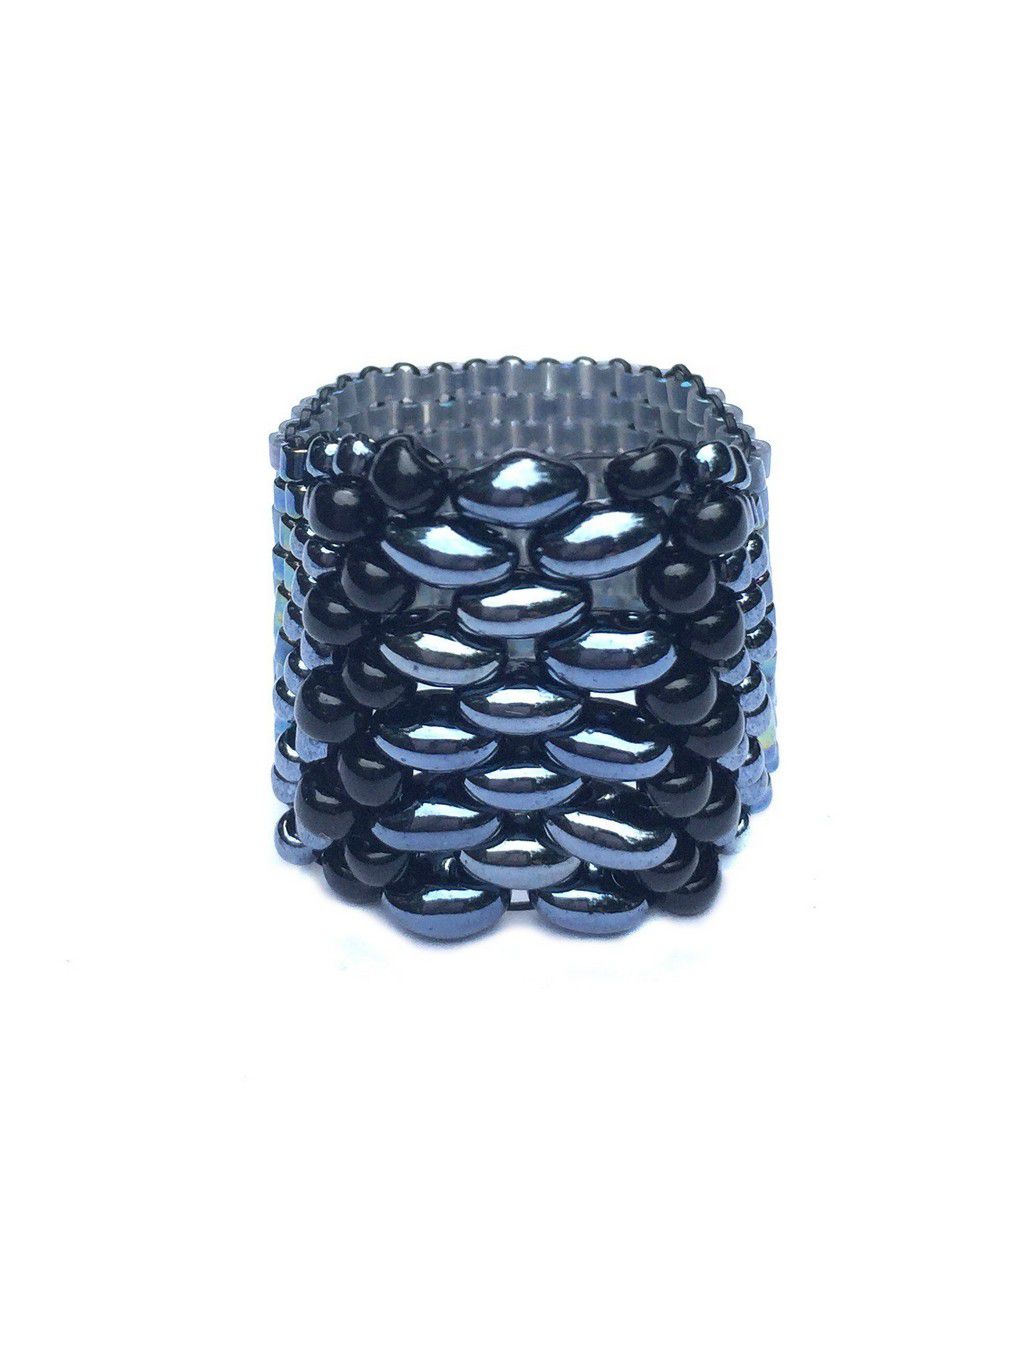 wide band ring fully beaded in hematite, black, and blue, super comfortable